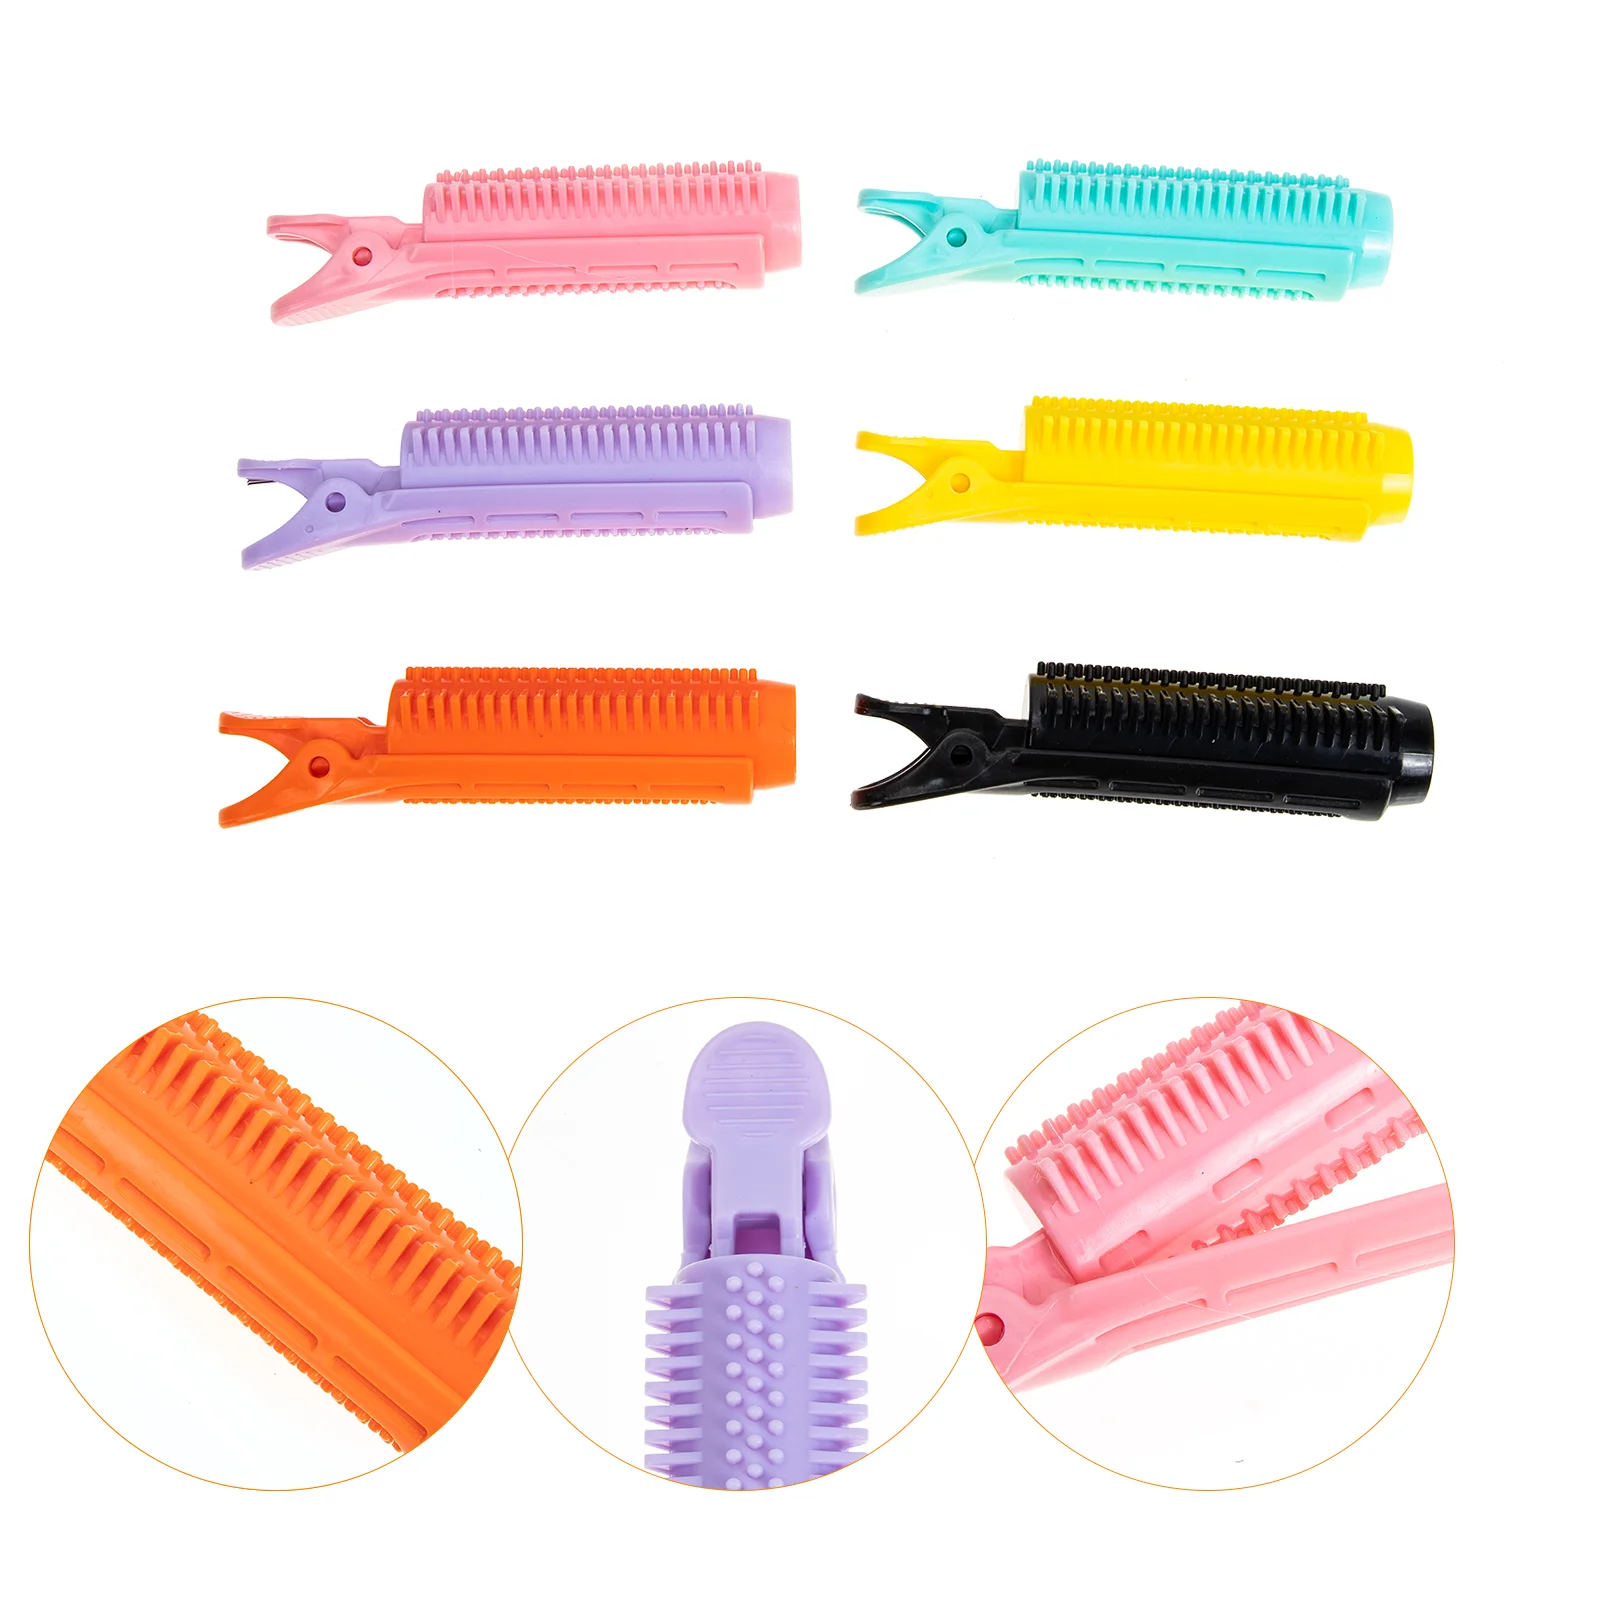 

Clips Root Hair Fluffy Clip Volumizing Roller Lifter Instant Clamp Curler Volume Bang Lifting Styling Ahair Wave Hairstyling